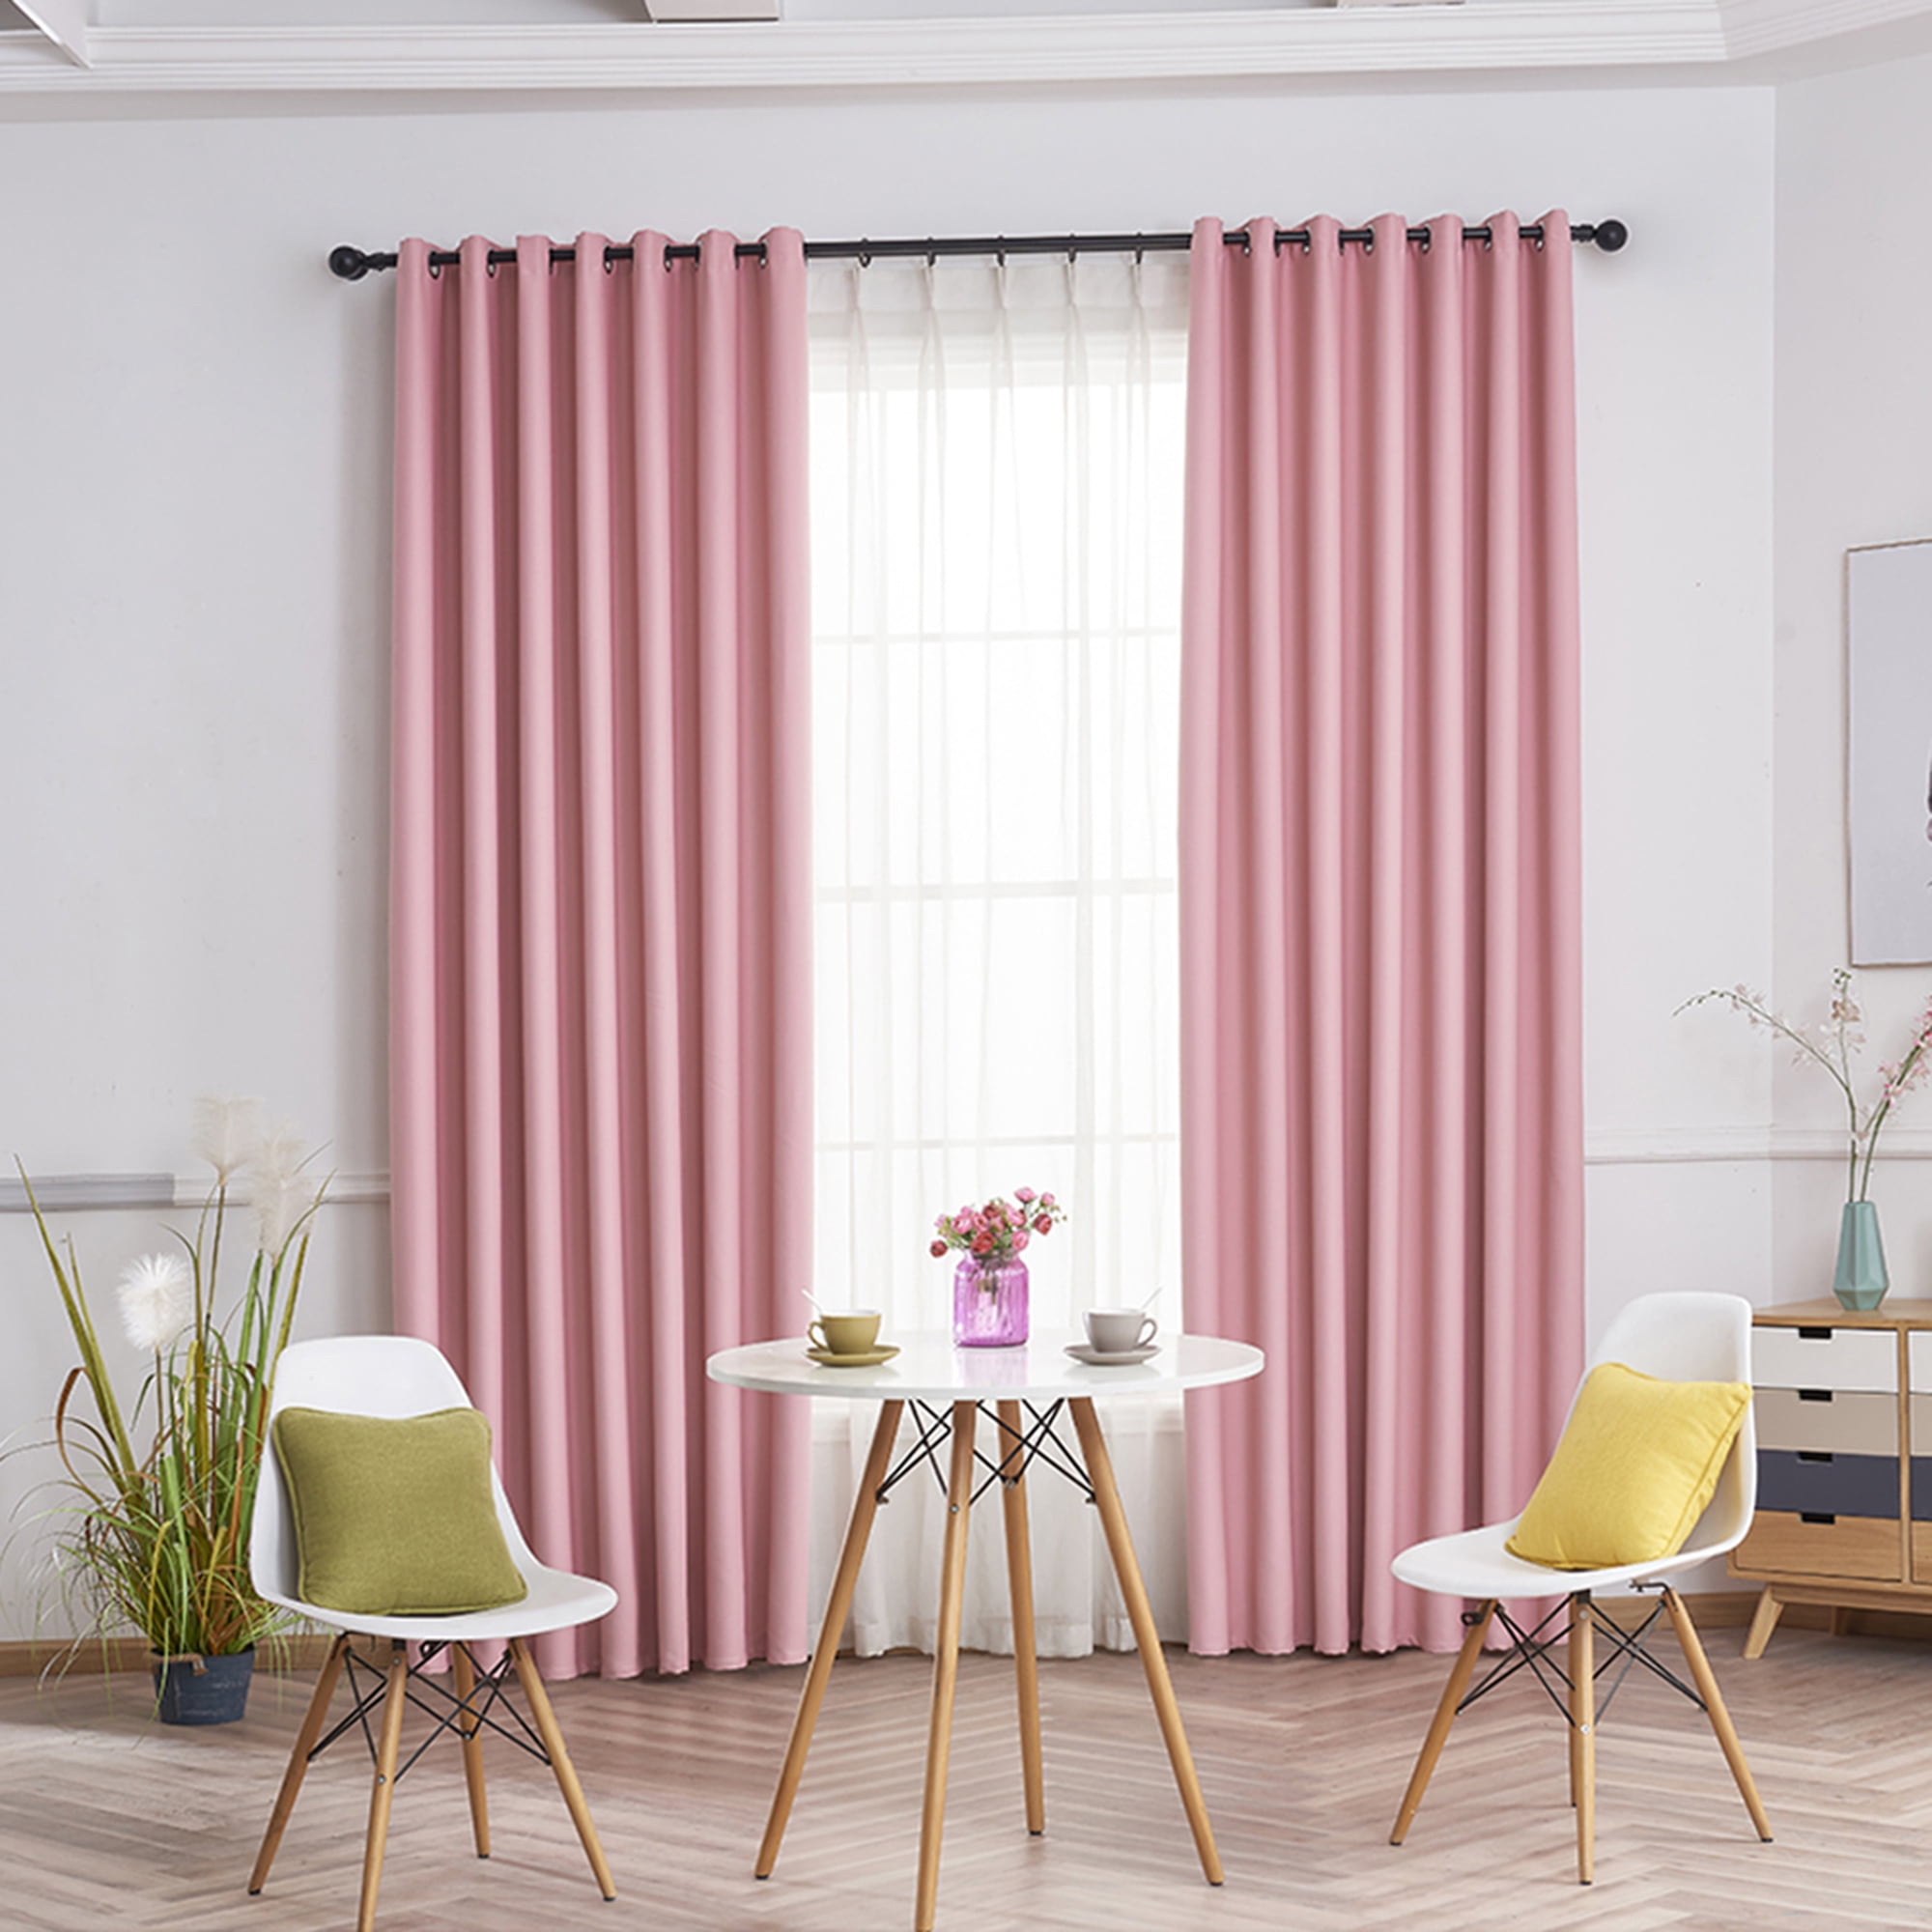 THERMAL BLACKOUT CURTAINS EYELET RING TOP LIVING ROOM